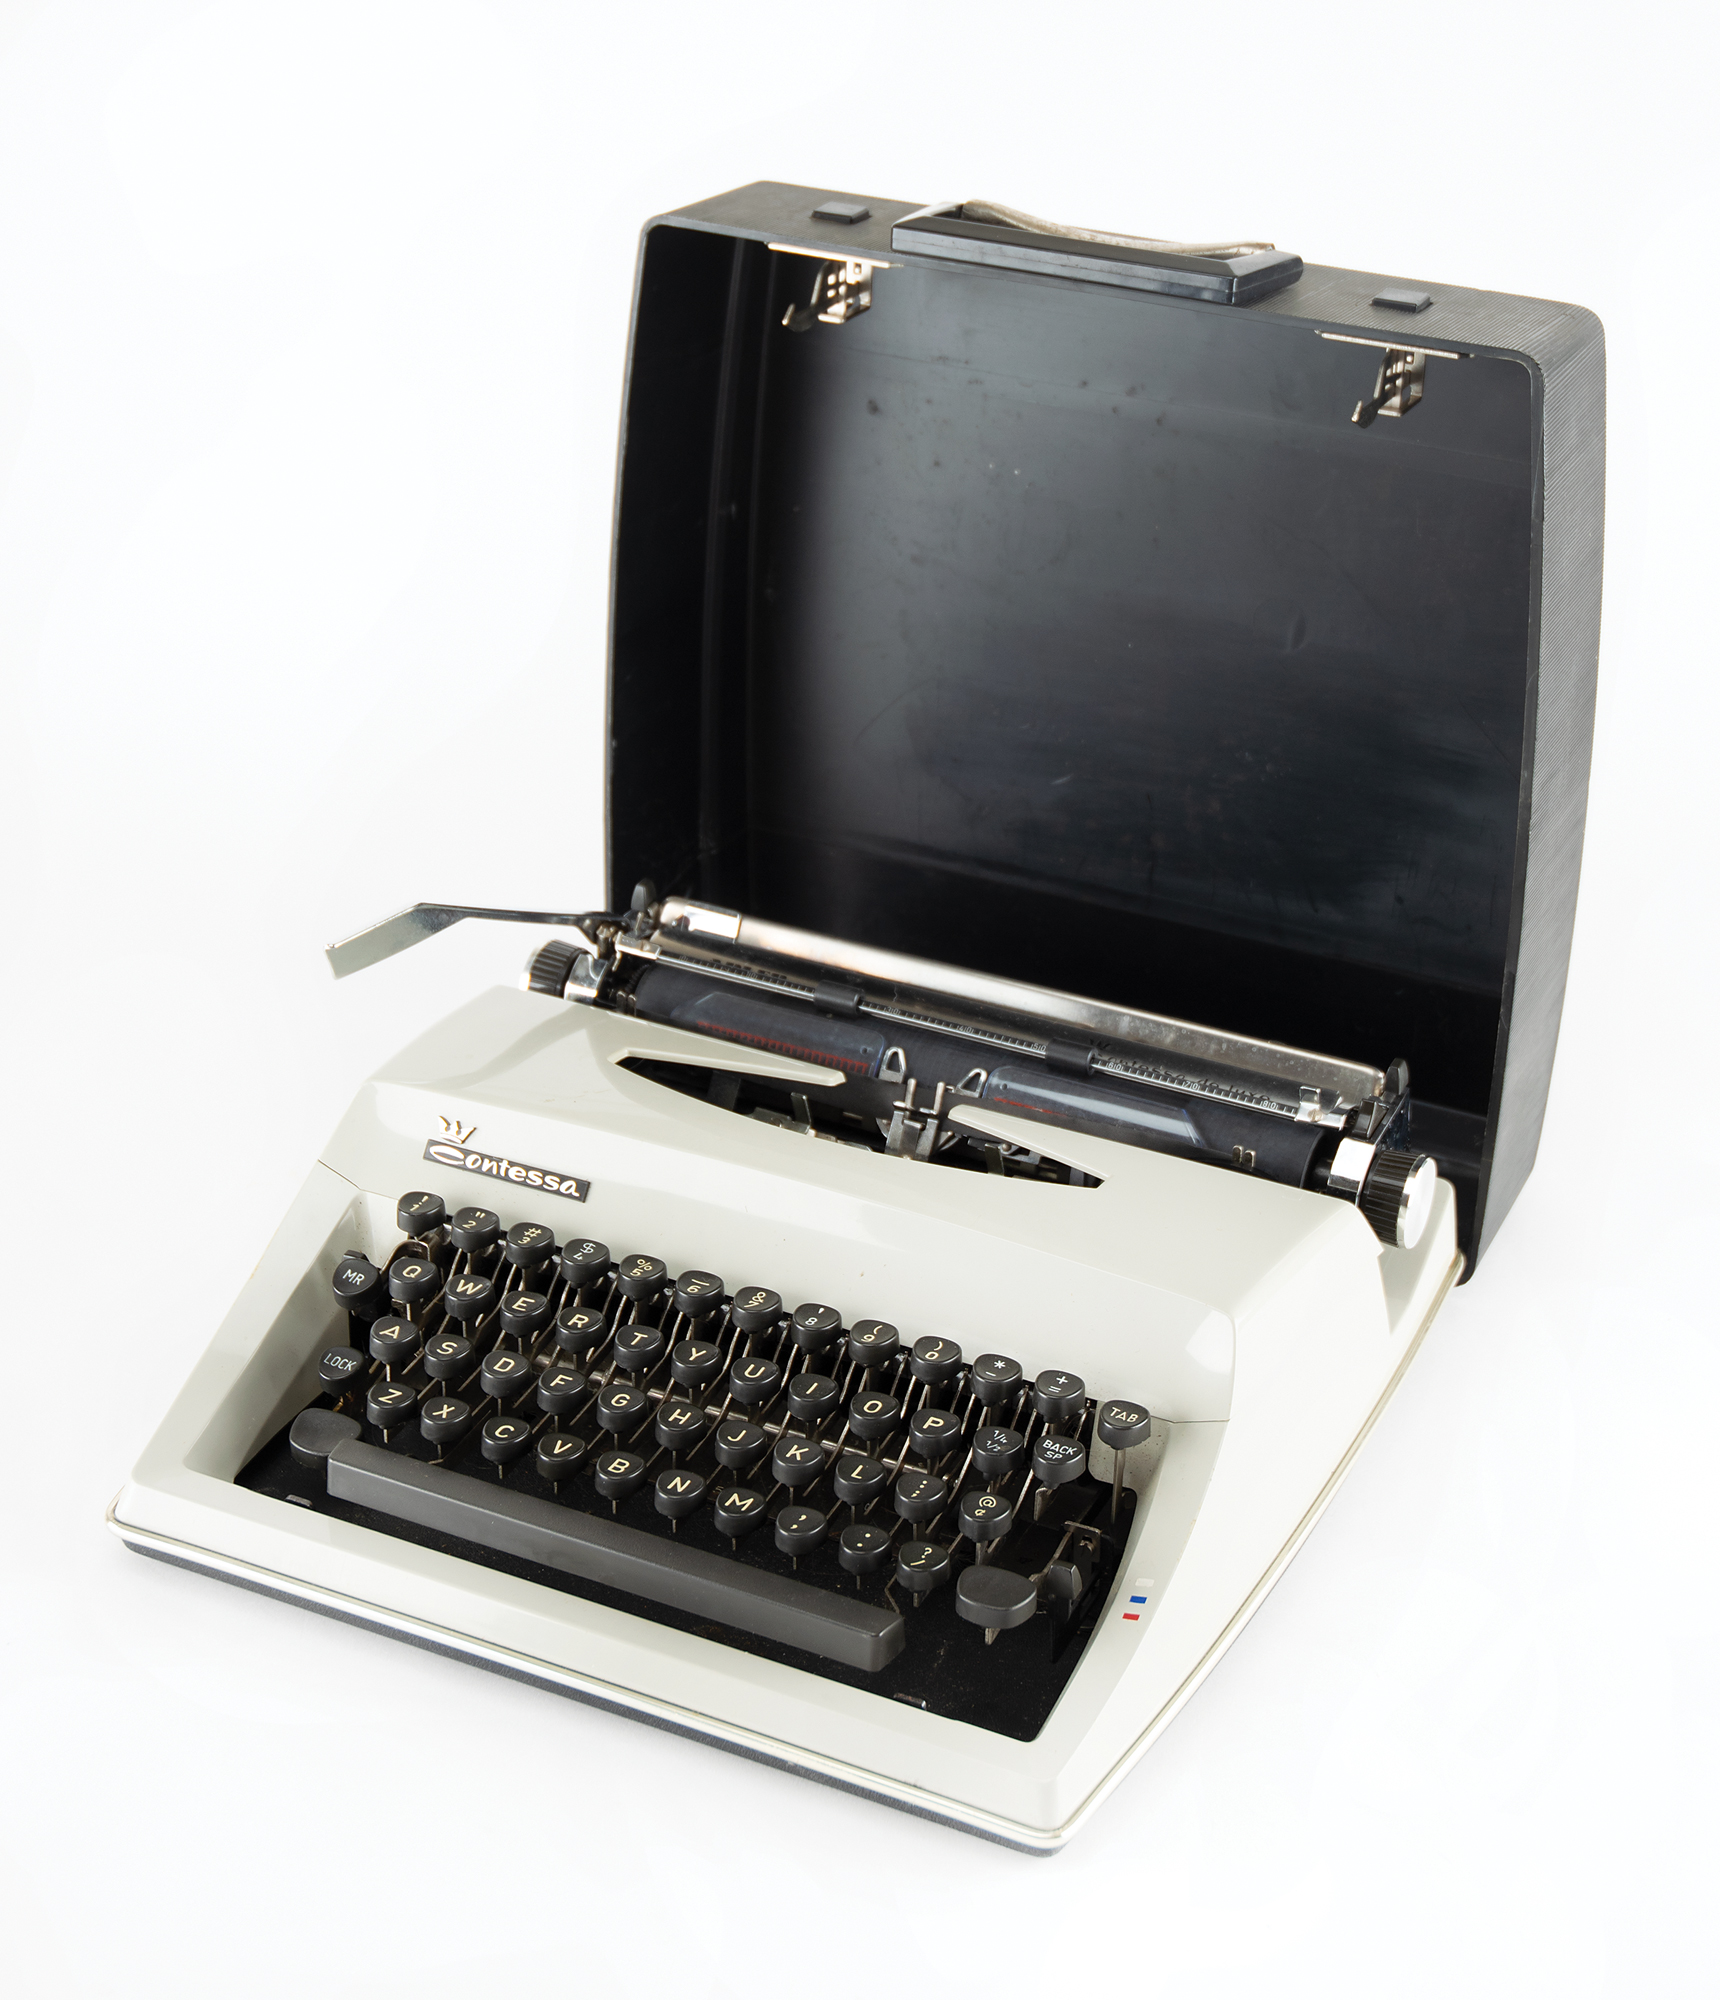 Lot #704 Rod Serling's Personally-Owned and -Used Typewriter